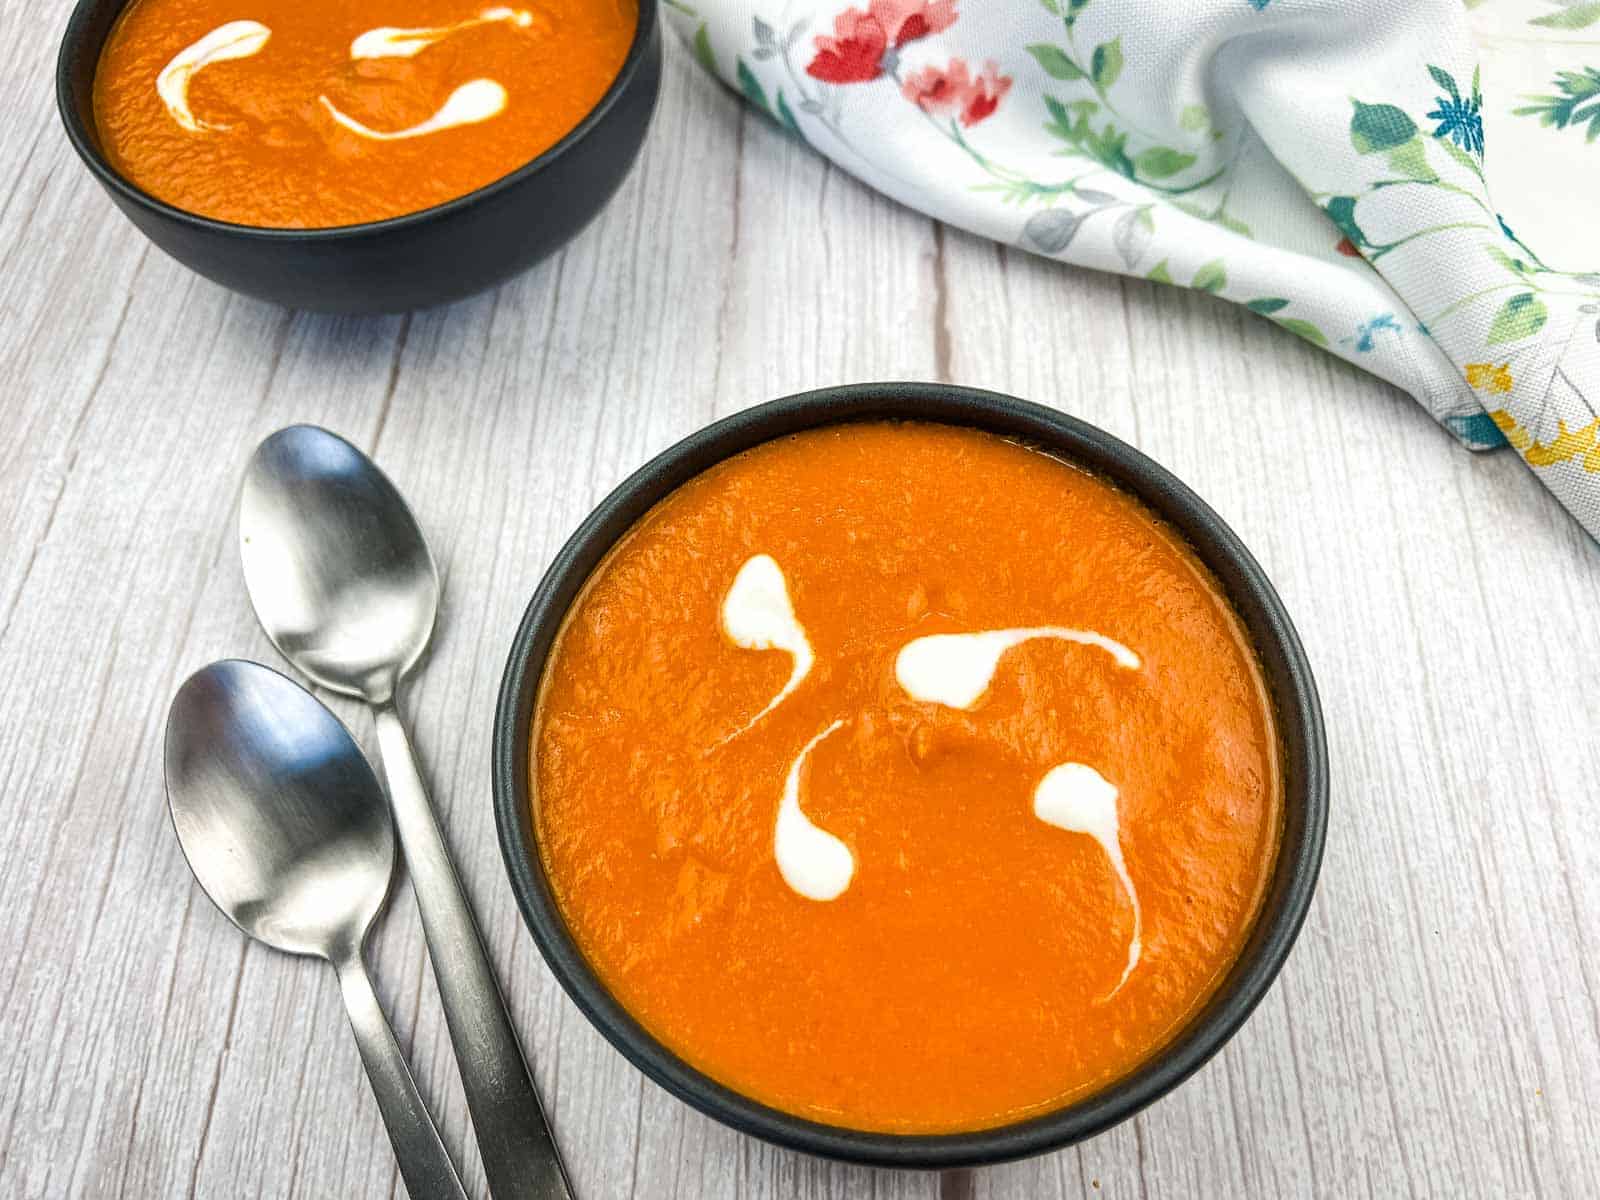 A bowl of oven-roasted tomato soup with two spoons.